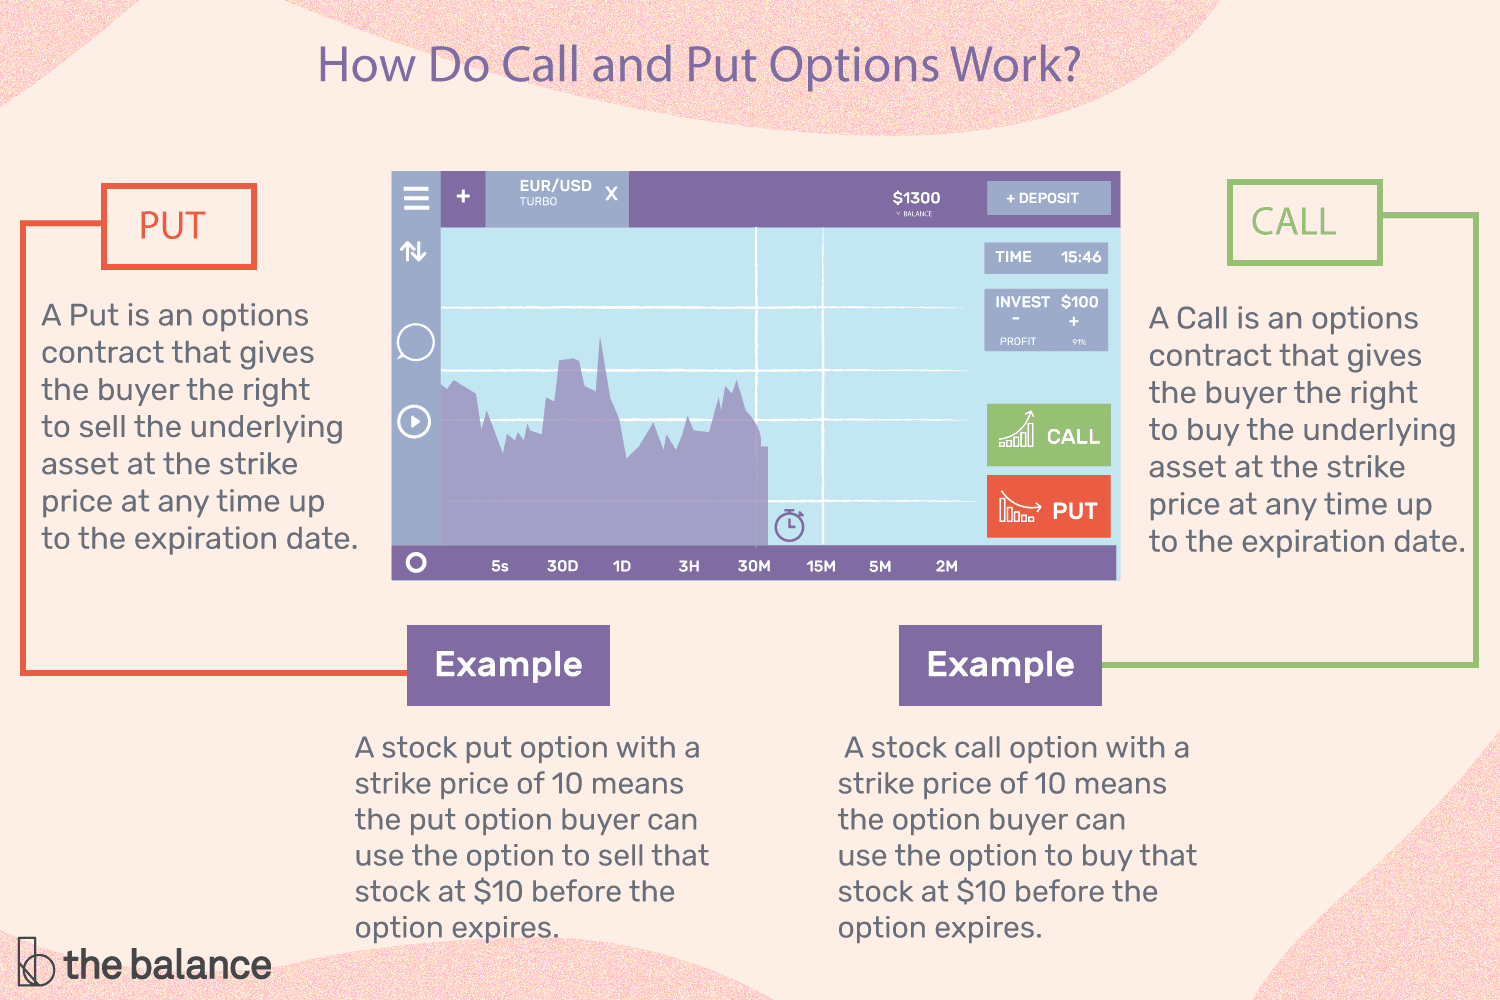 Call and Put Options: What Are They?